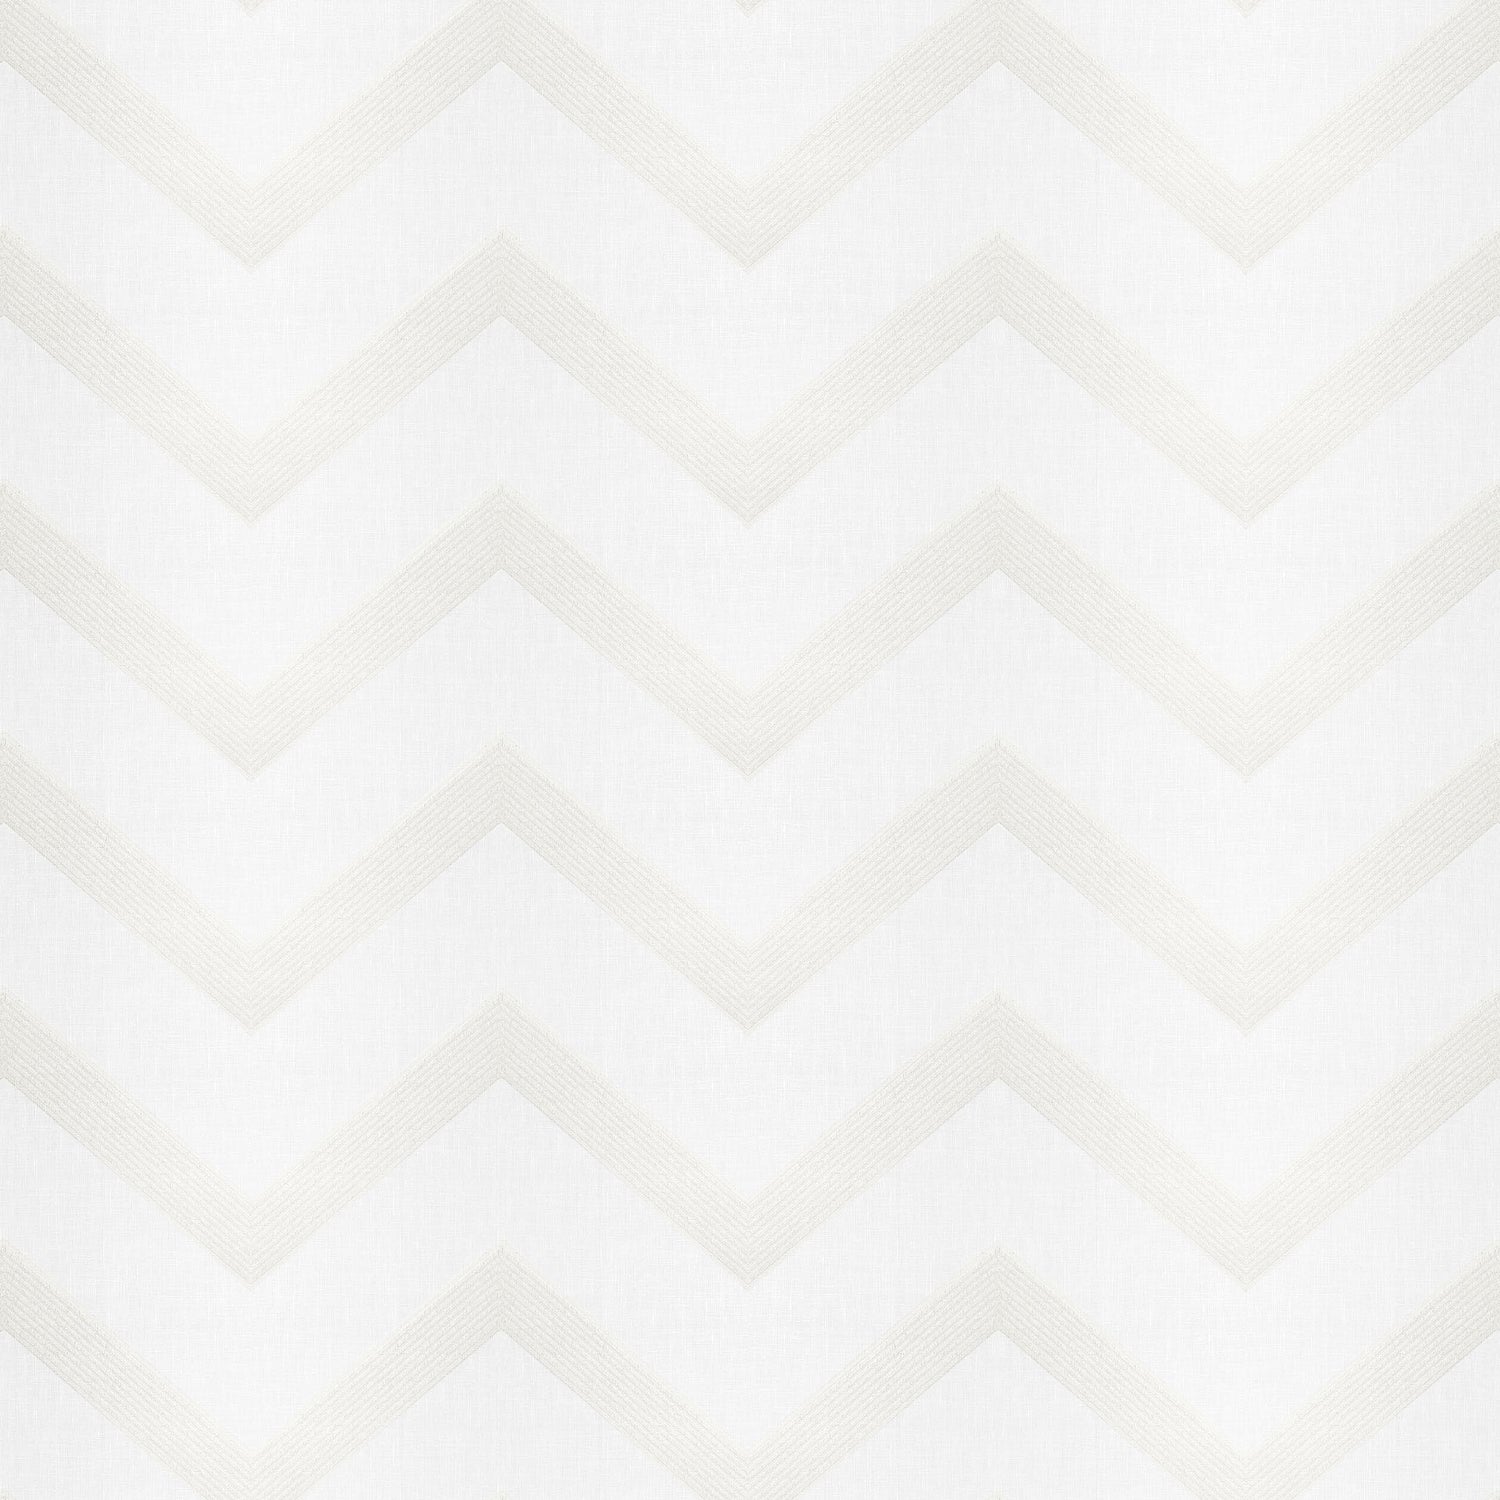 Adalar Chevron fabric in off white color - pattern number AW9129 - by Anna French in the Natural Glimmer collection